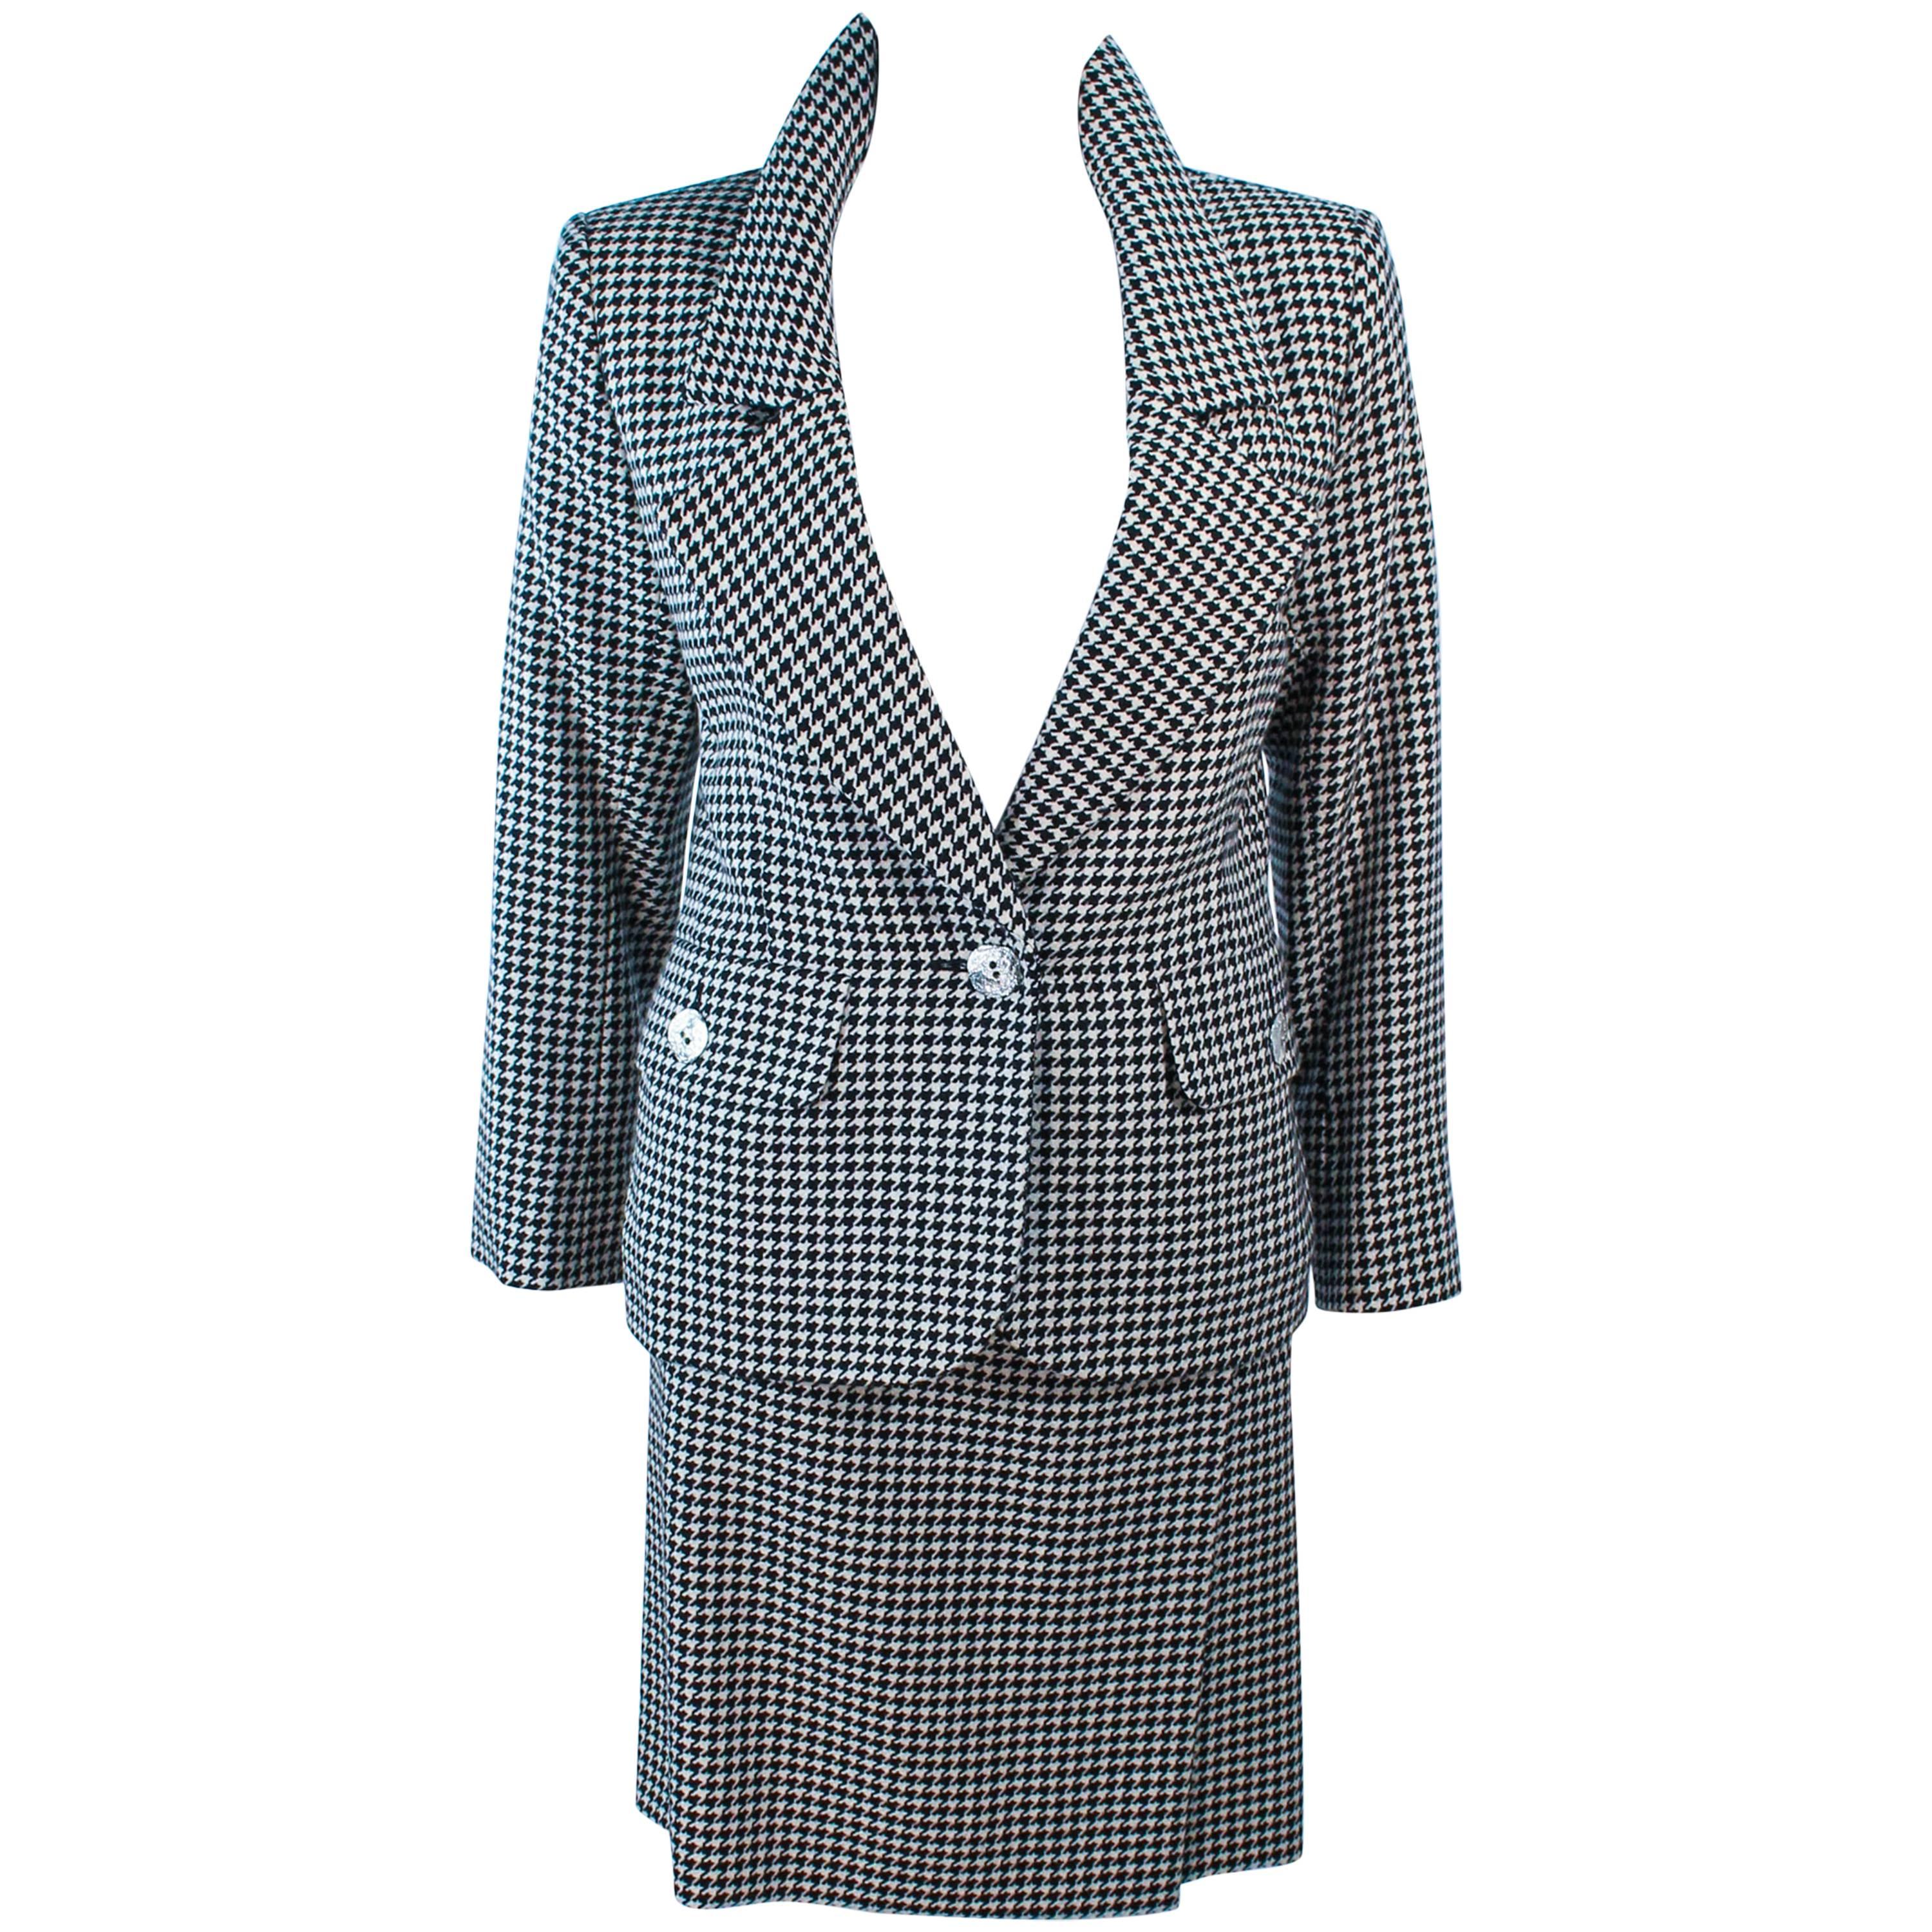 YVES SAINT LAURENT Black and White Houndstooth Skirt Suit Size 8 10 For Sale